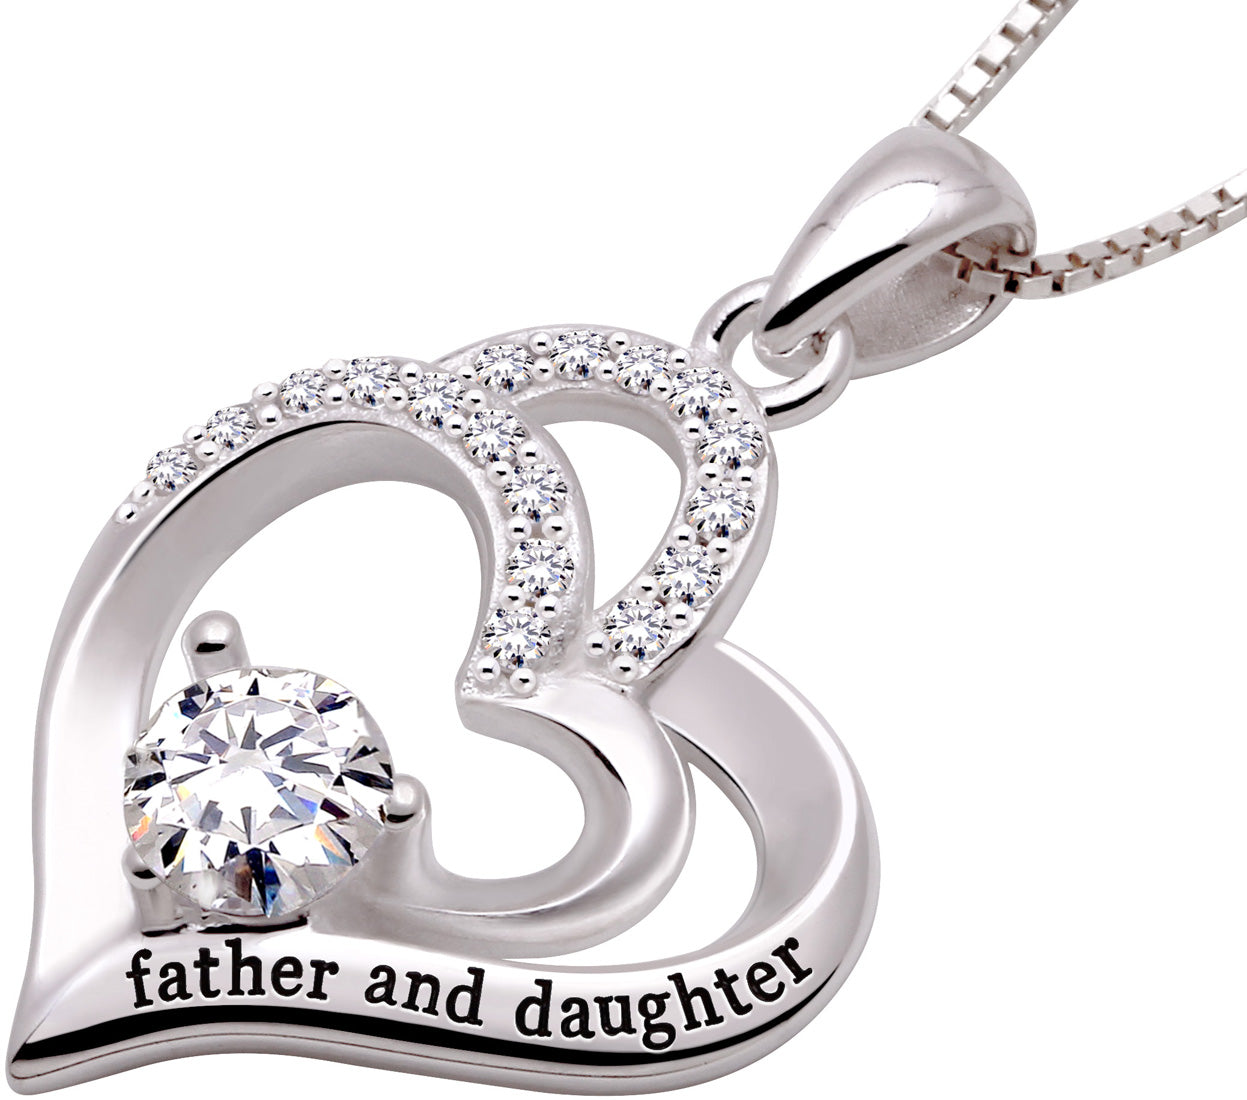 ALOV Jewelry Sterling Silver father and daughter Love Heart Cubic Zirconia Pendant Necklace